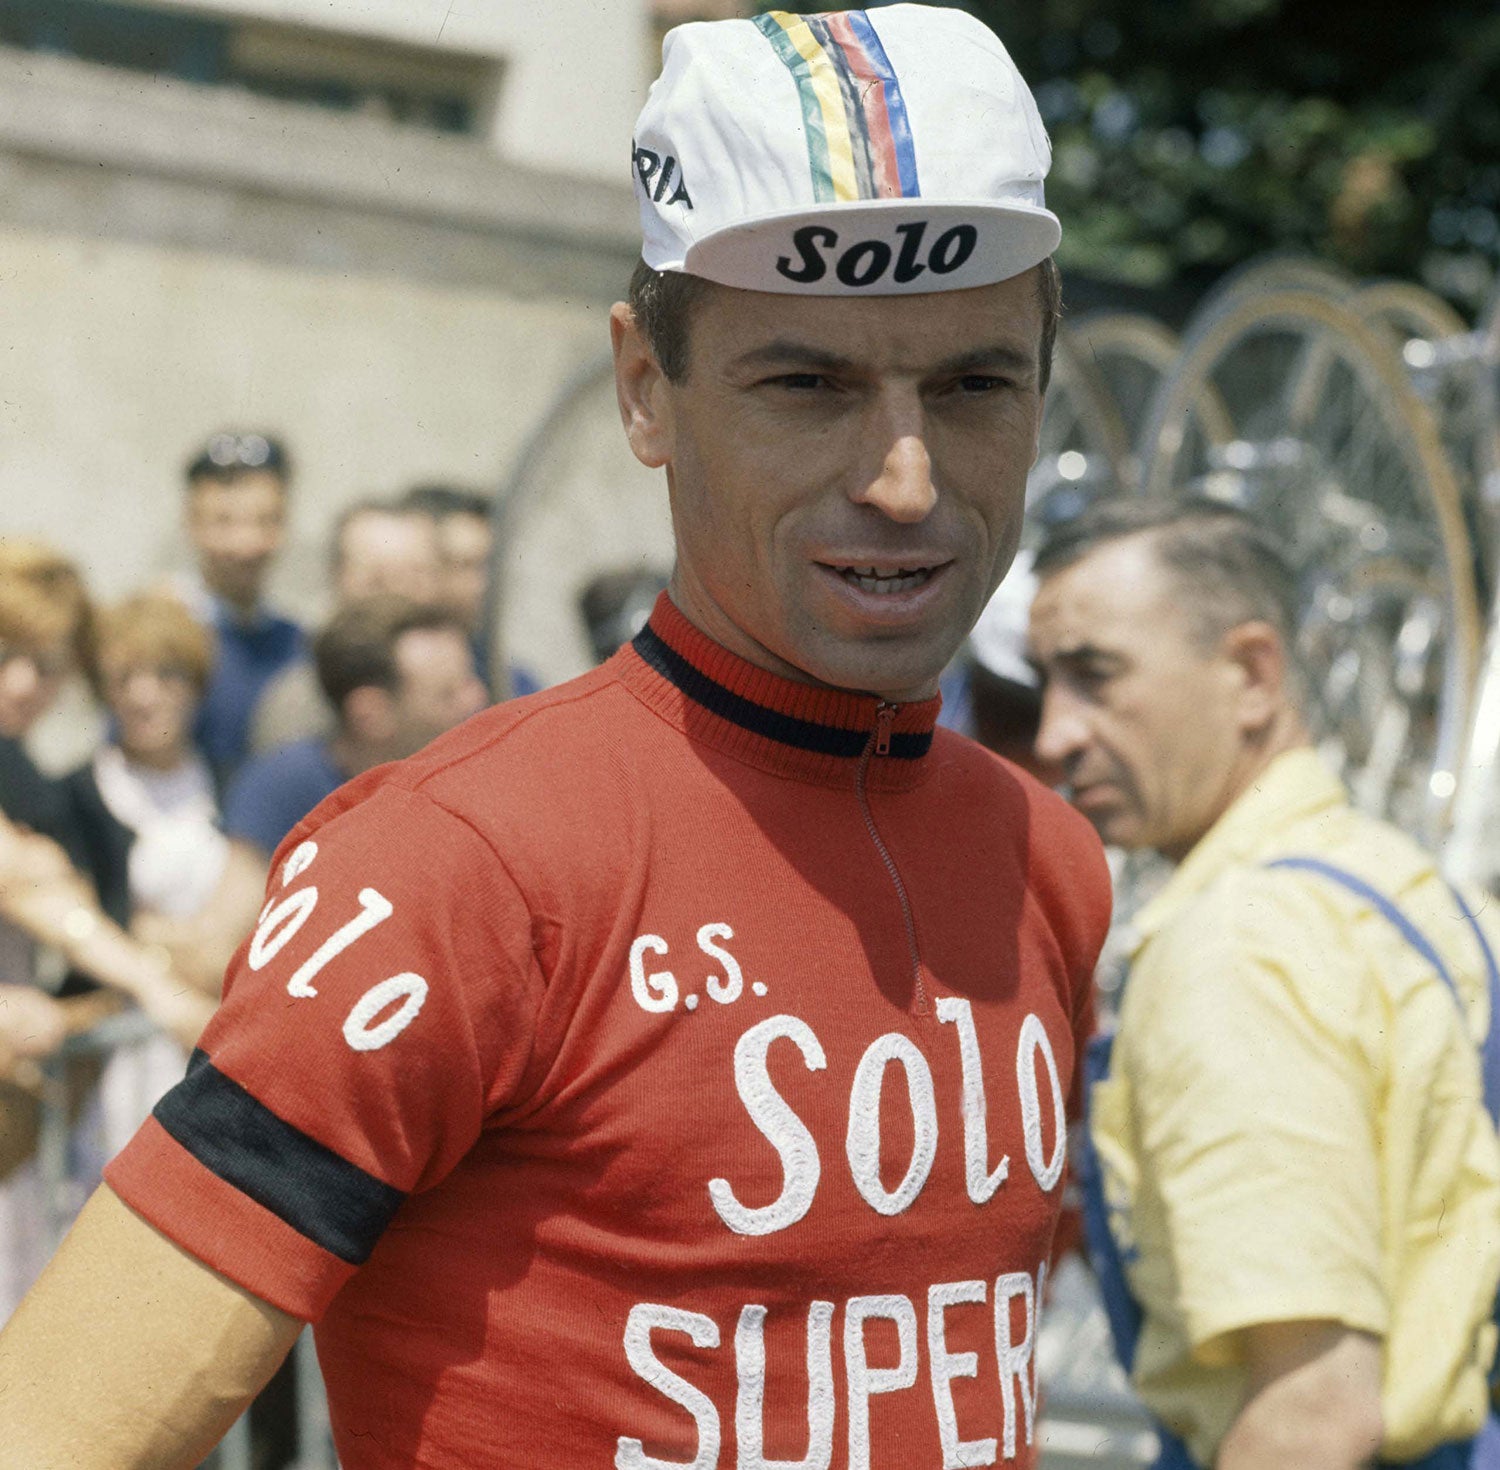 Rik Van Looy donning the iconic Solo-Superia red jersey. Photo credits: Offside / L'Equipe.